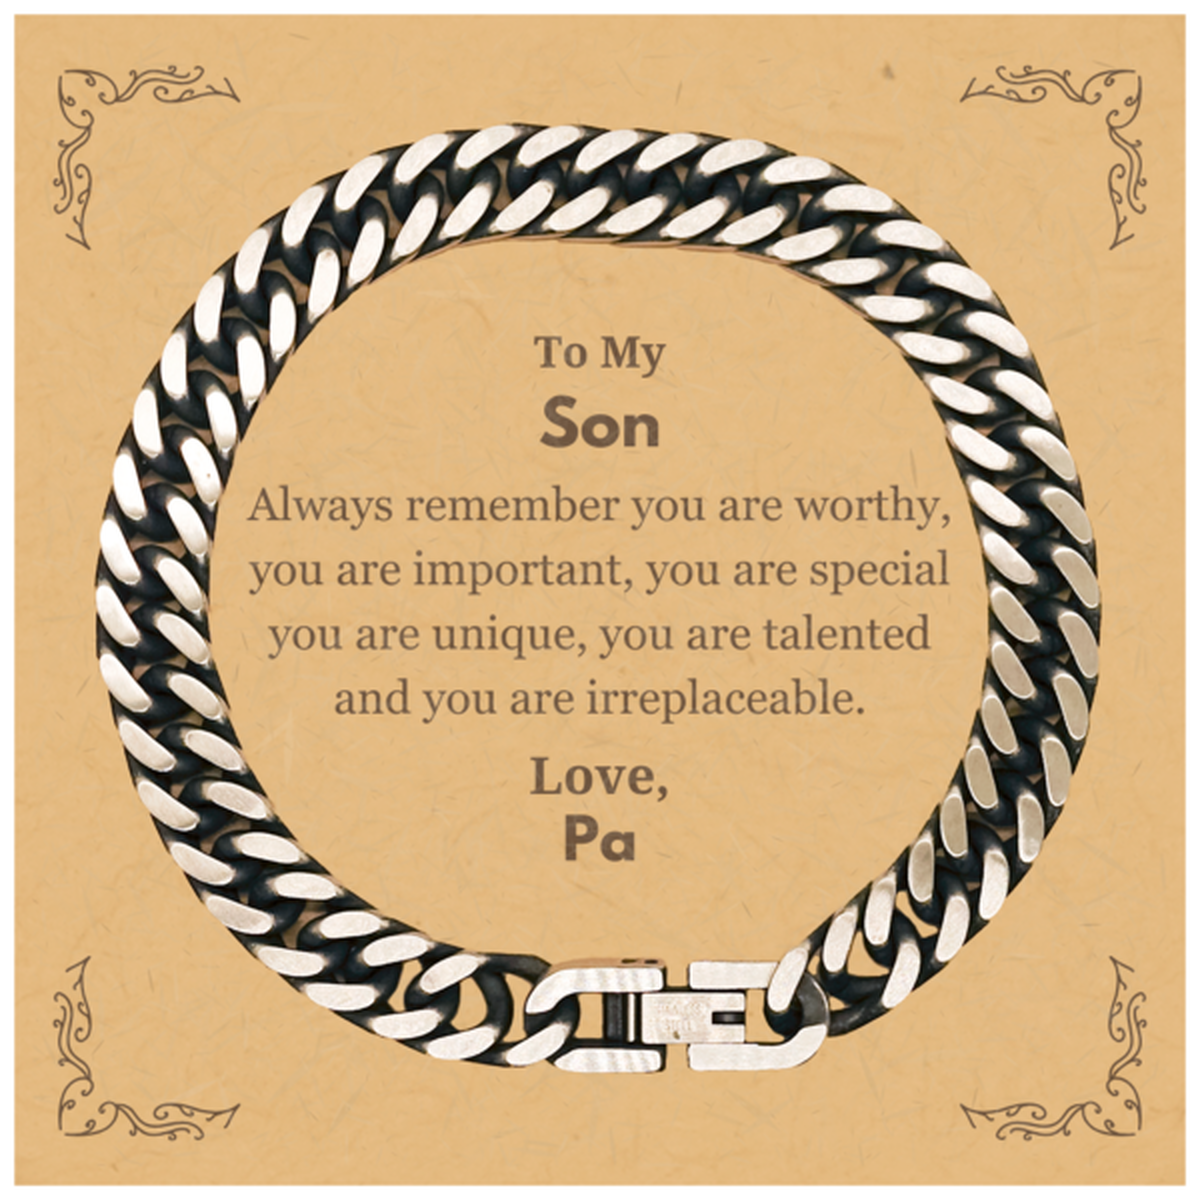 Son Birthday Gifts from Pa, Inspirational Cuban Link Chain Bracelet for Son Christmas Graduation Gifts for Son Always remember you are worthy, you are important. Love, Pa